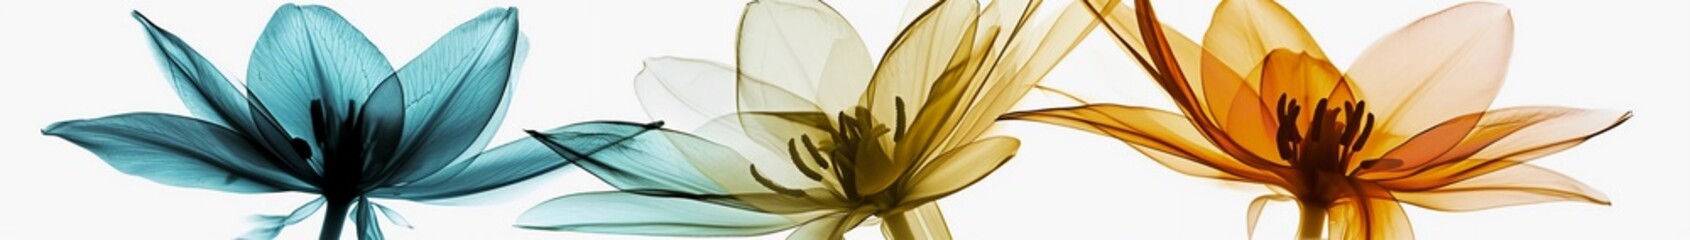 X-ray Flowers - flowers, x-ray, translucent, subtle, nature, romantic